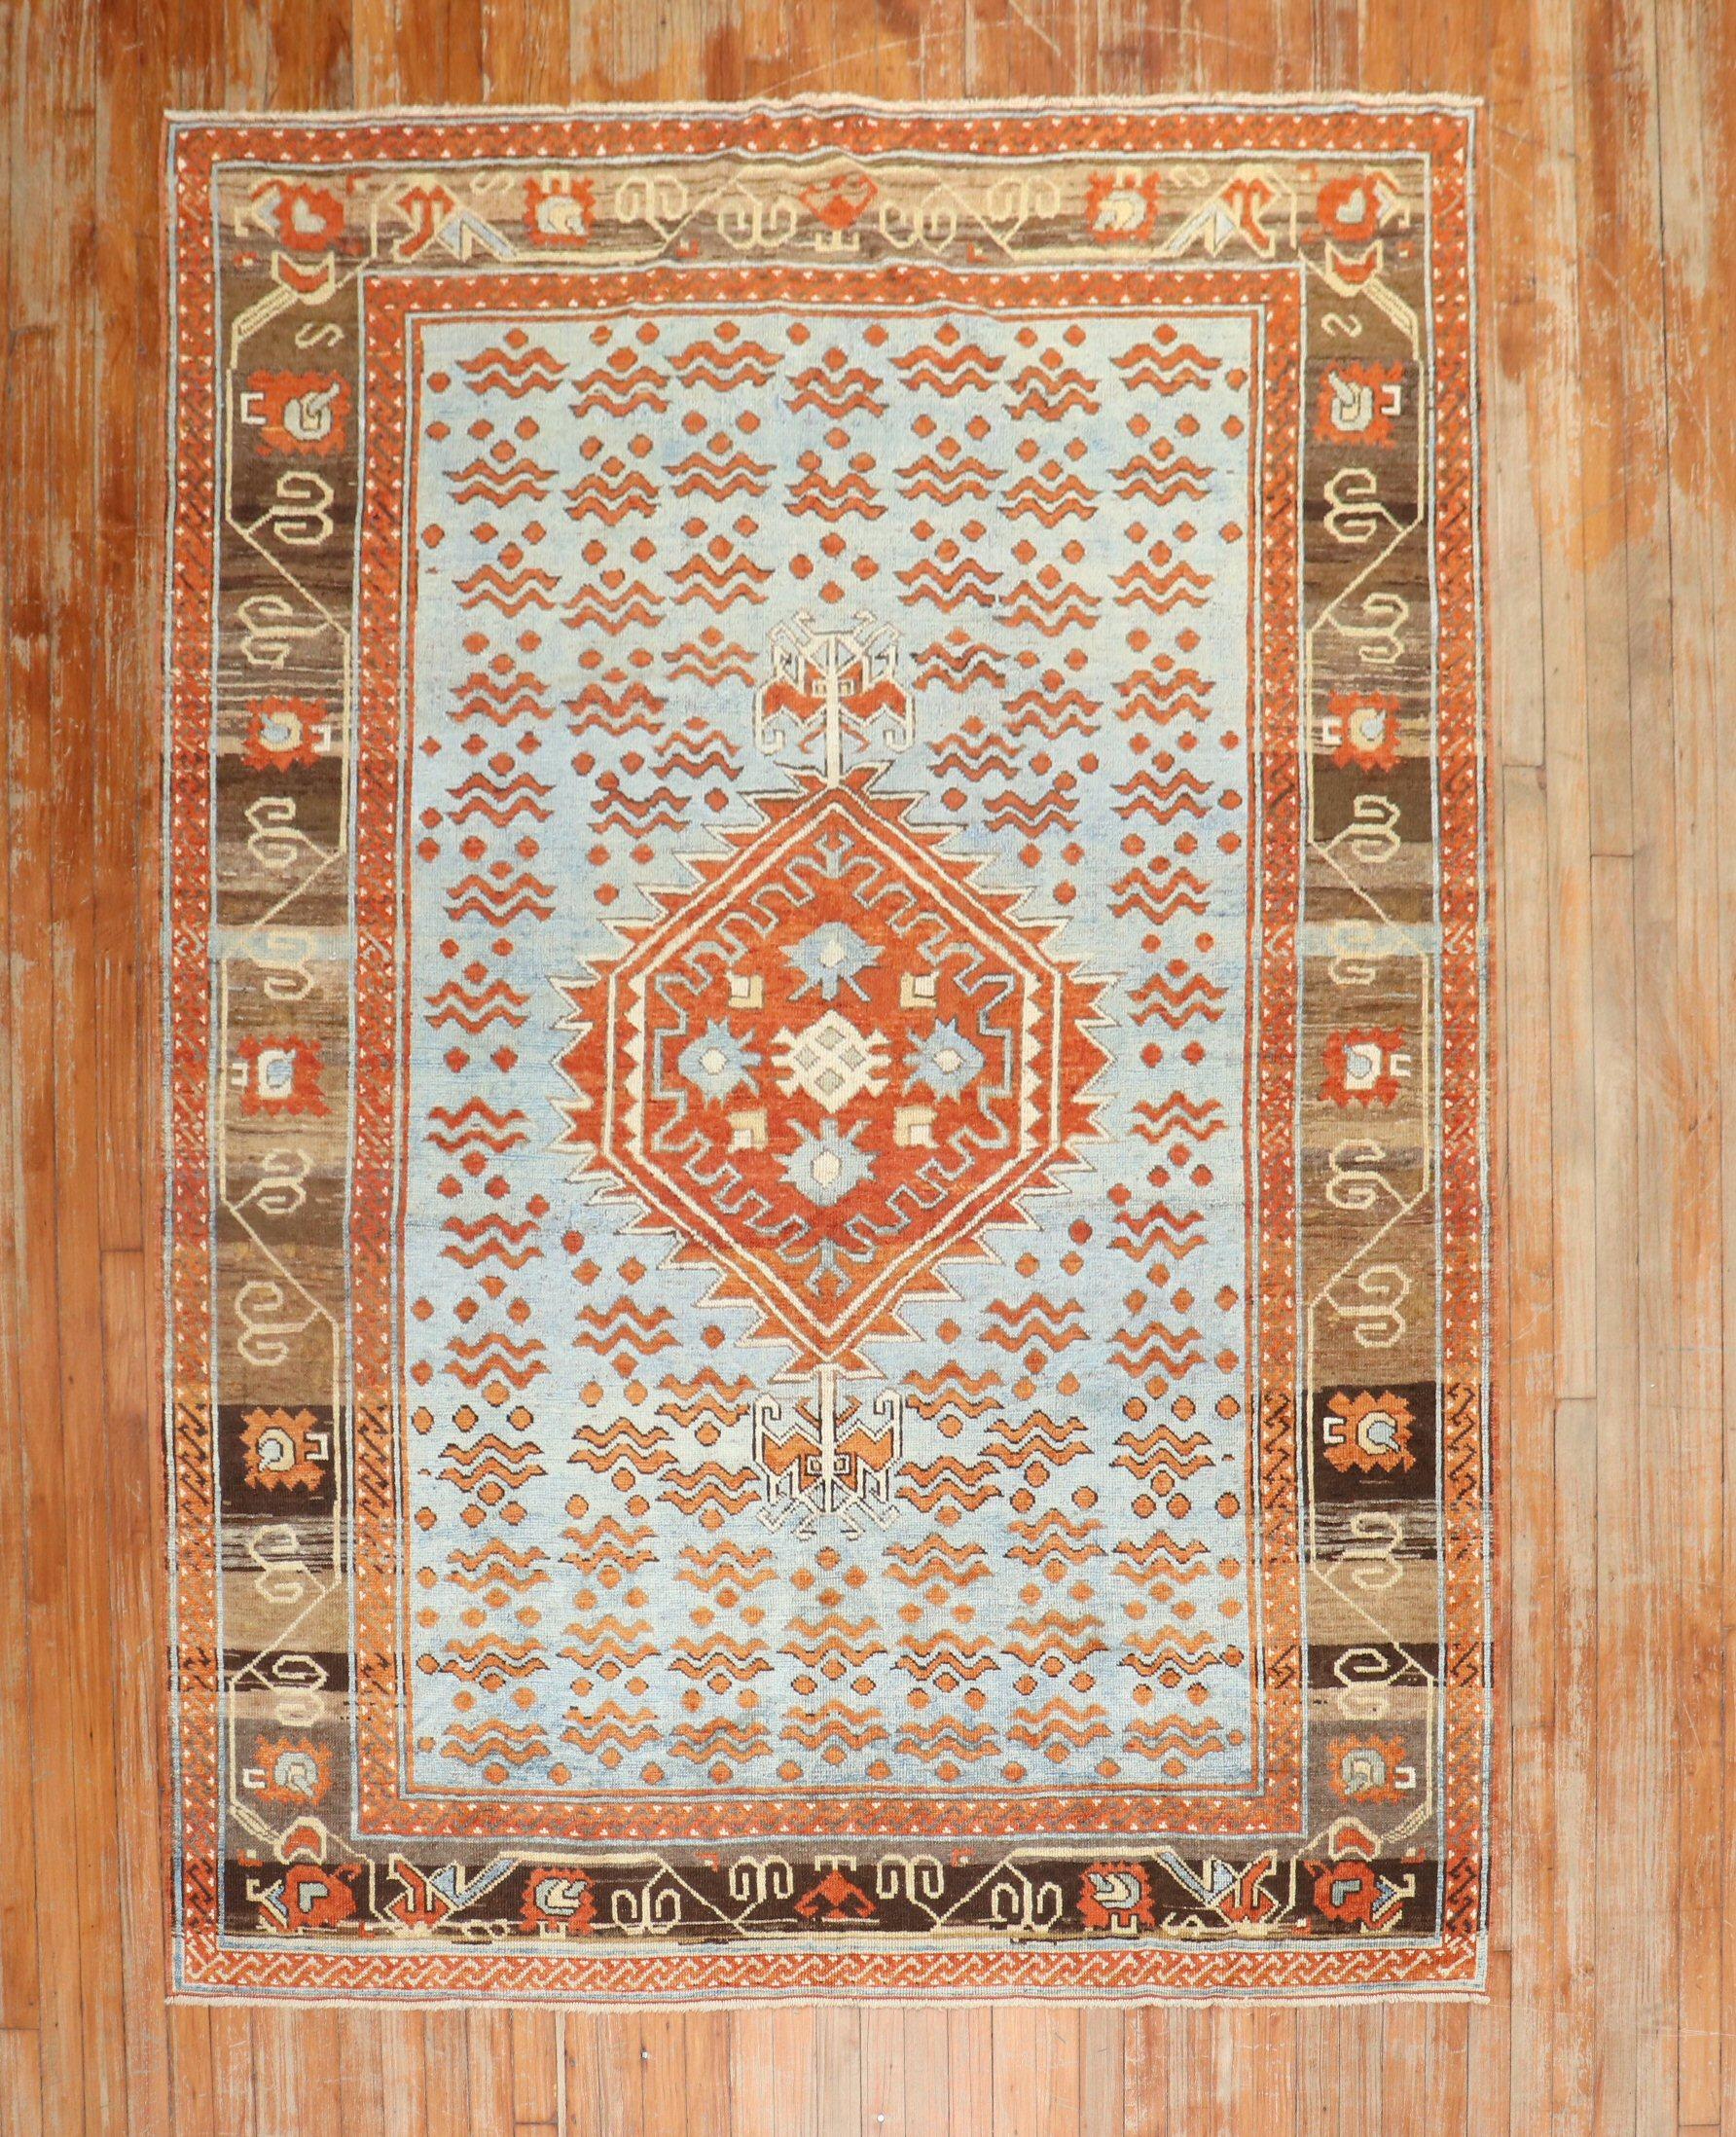 An obscure east Turkestan rug from the 3rd quarter of the 20th century featuring a Chintamani motif on an blue field.

5'9'' x 7'8''